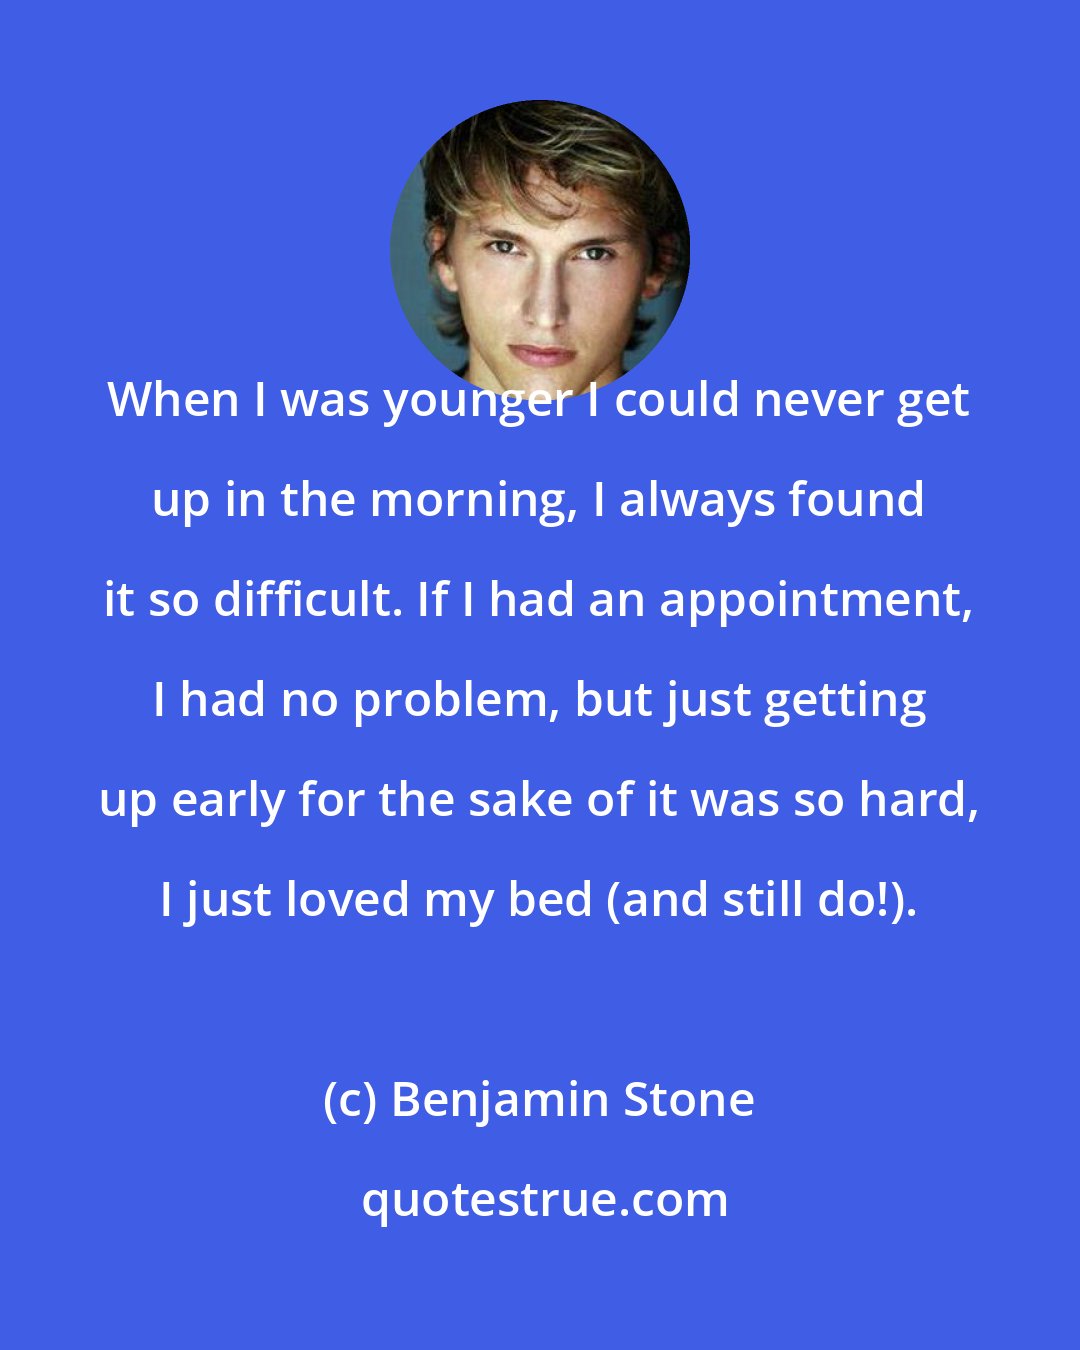 Benjamin Stone: When I was younger I could never get up in the morning, I always found it so difficult. If I had an appointment, I had no problem, but just getting up early for the sake of it was so hard, I just loved my bed (and still do!).